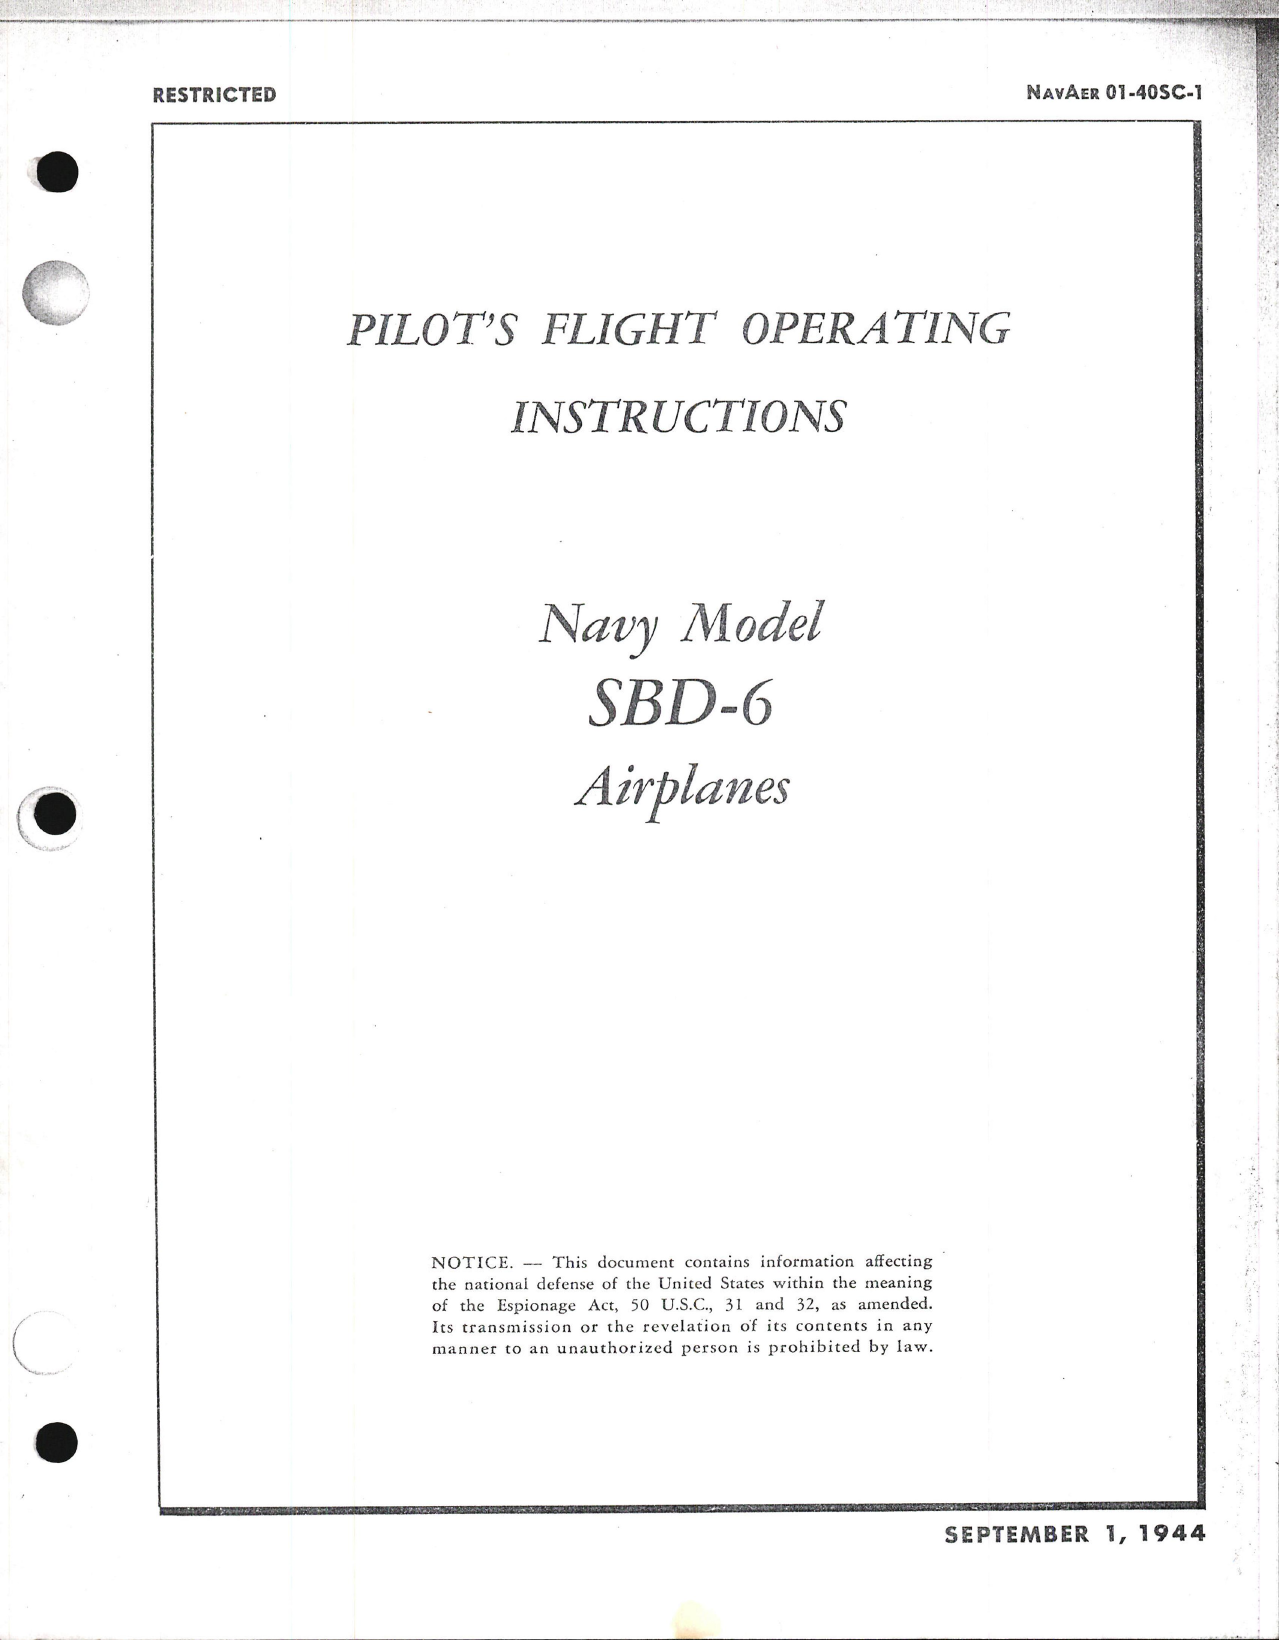 Sample page 1 from AirCorps Library document: Pilot's Flight Instructions for Navy Model SBD-6 